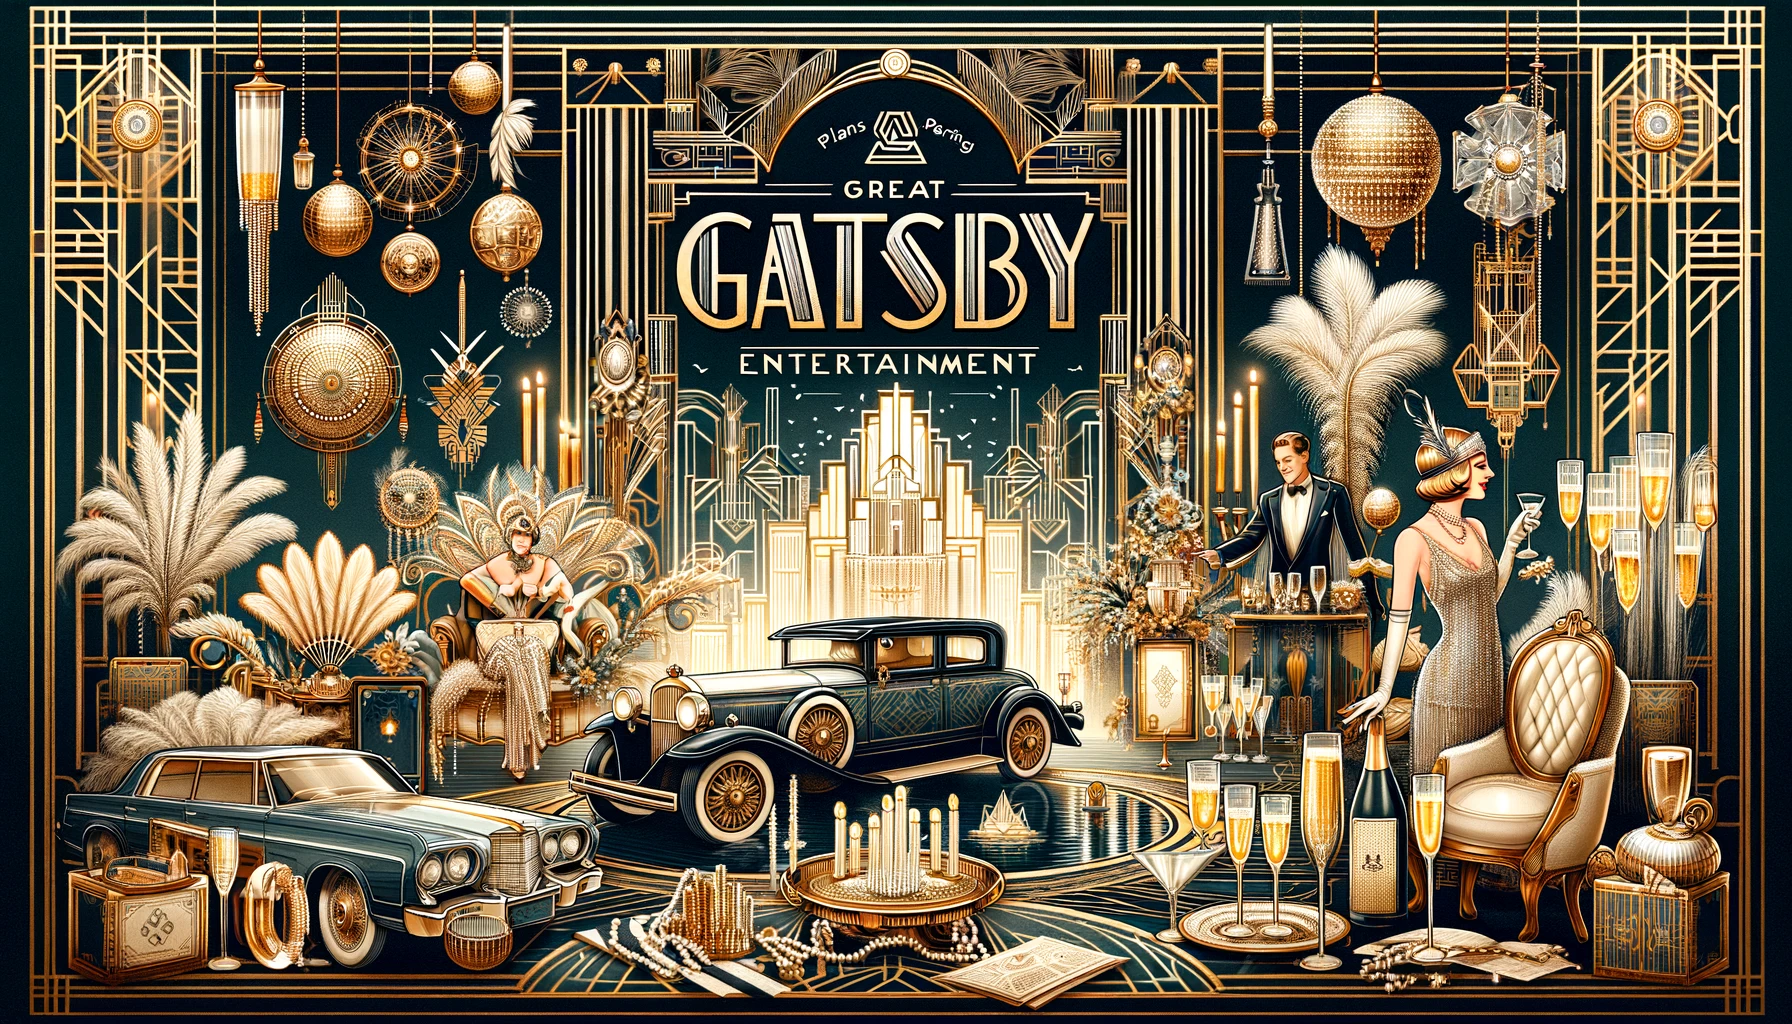 Great Gatsby party entertainment